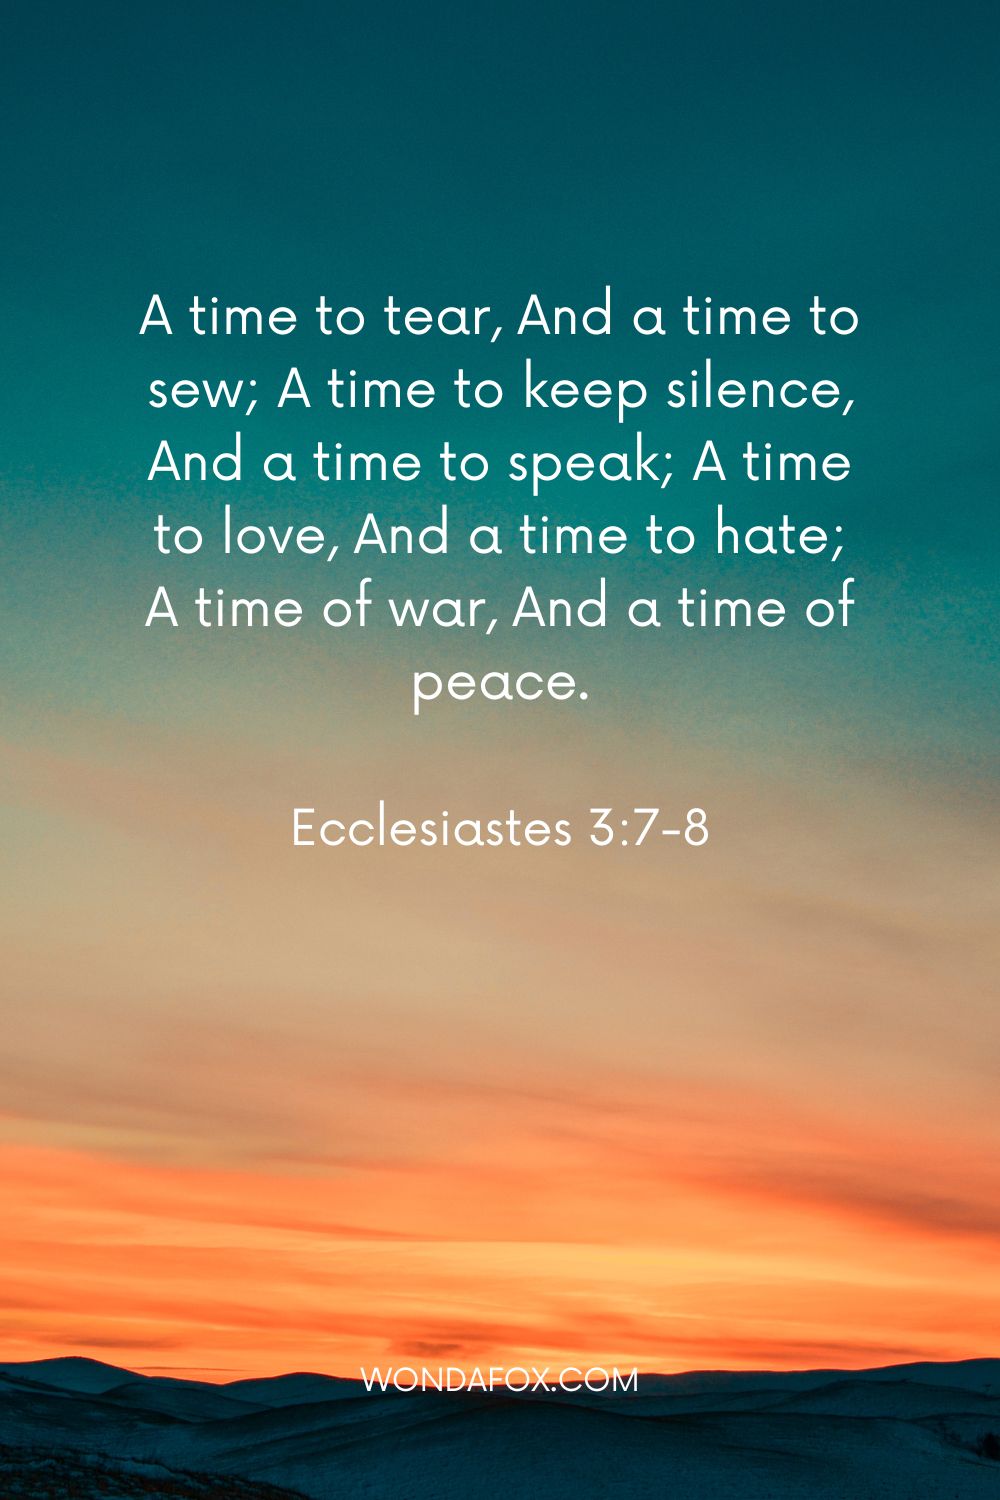 A time to tear, And a time to sew; A time to keep silence, And a time to speak; A time to love, And a time to hate; A time of war, And a time of peace.